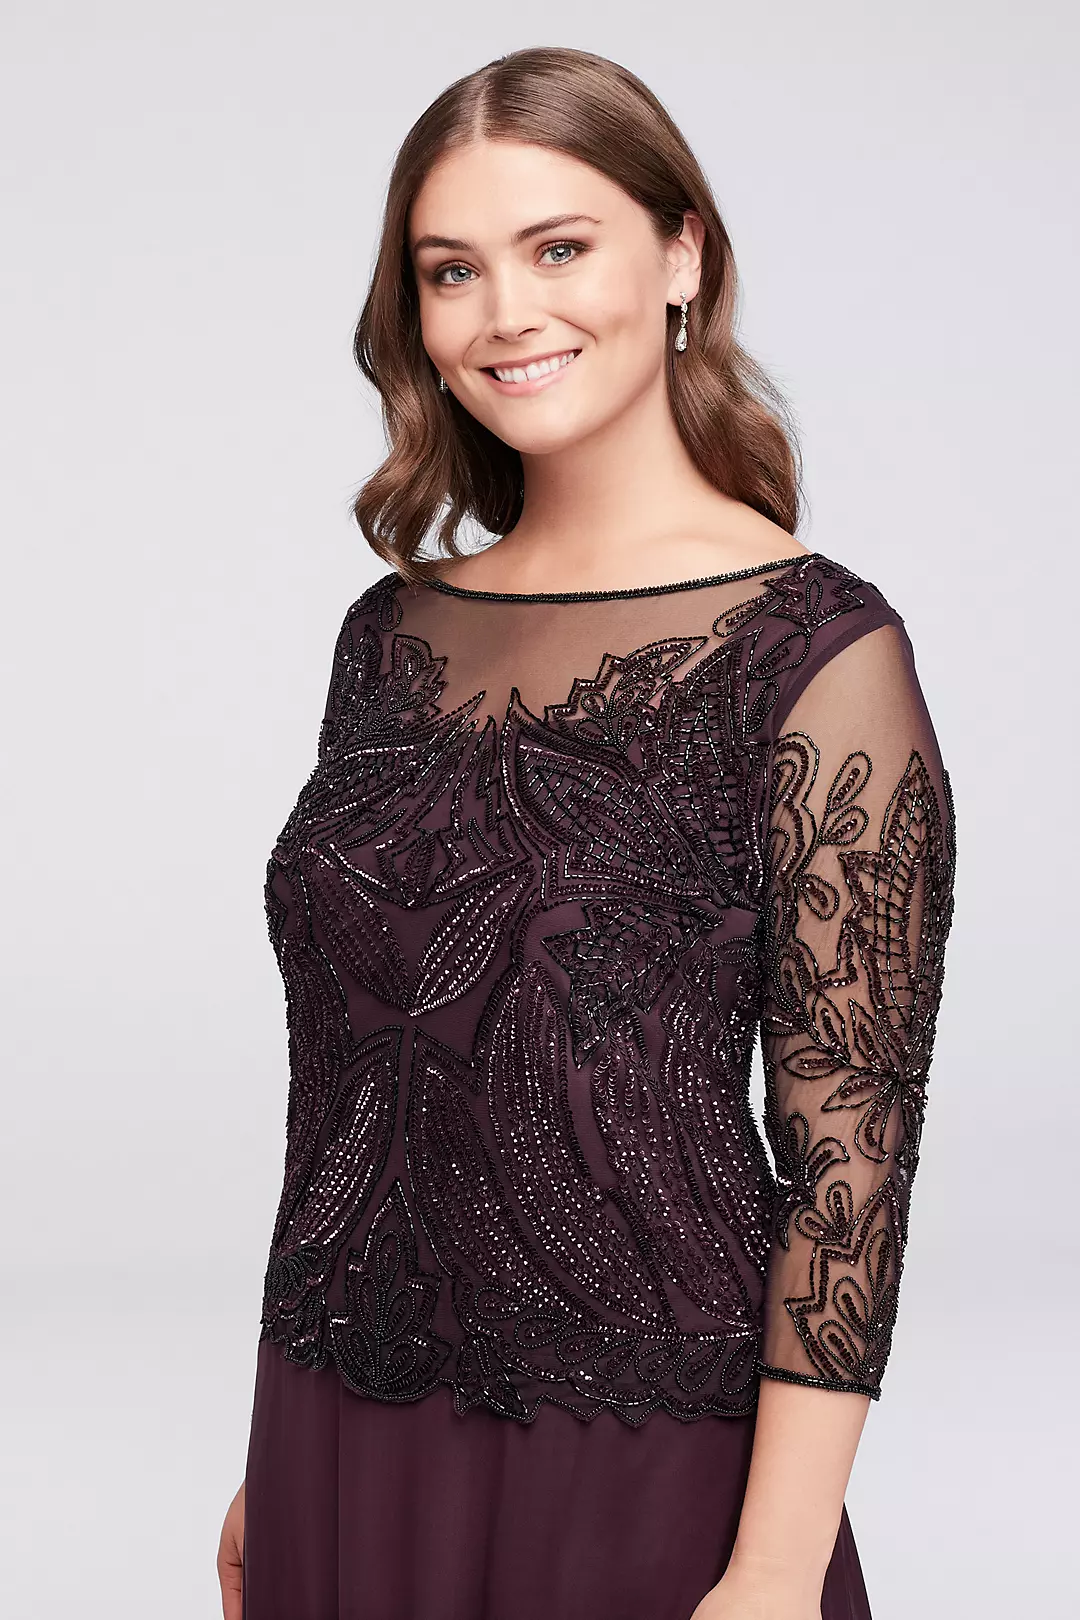 Sequined and Beaded Mesh Plus Size Dress Image 3